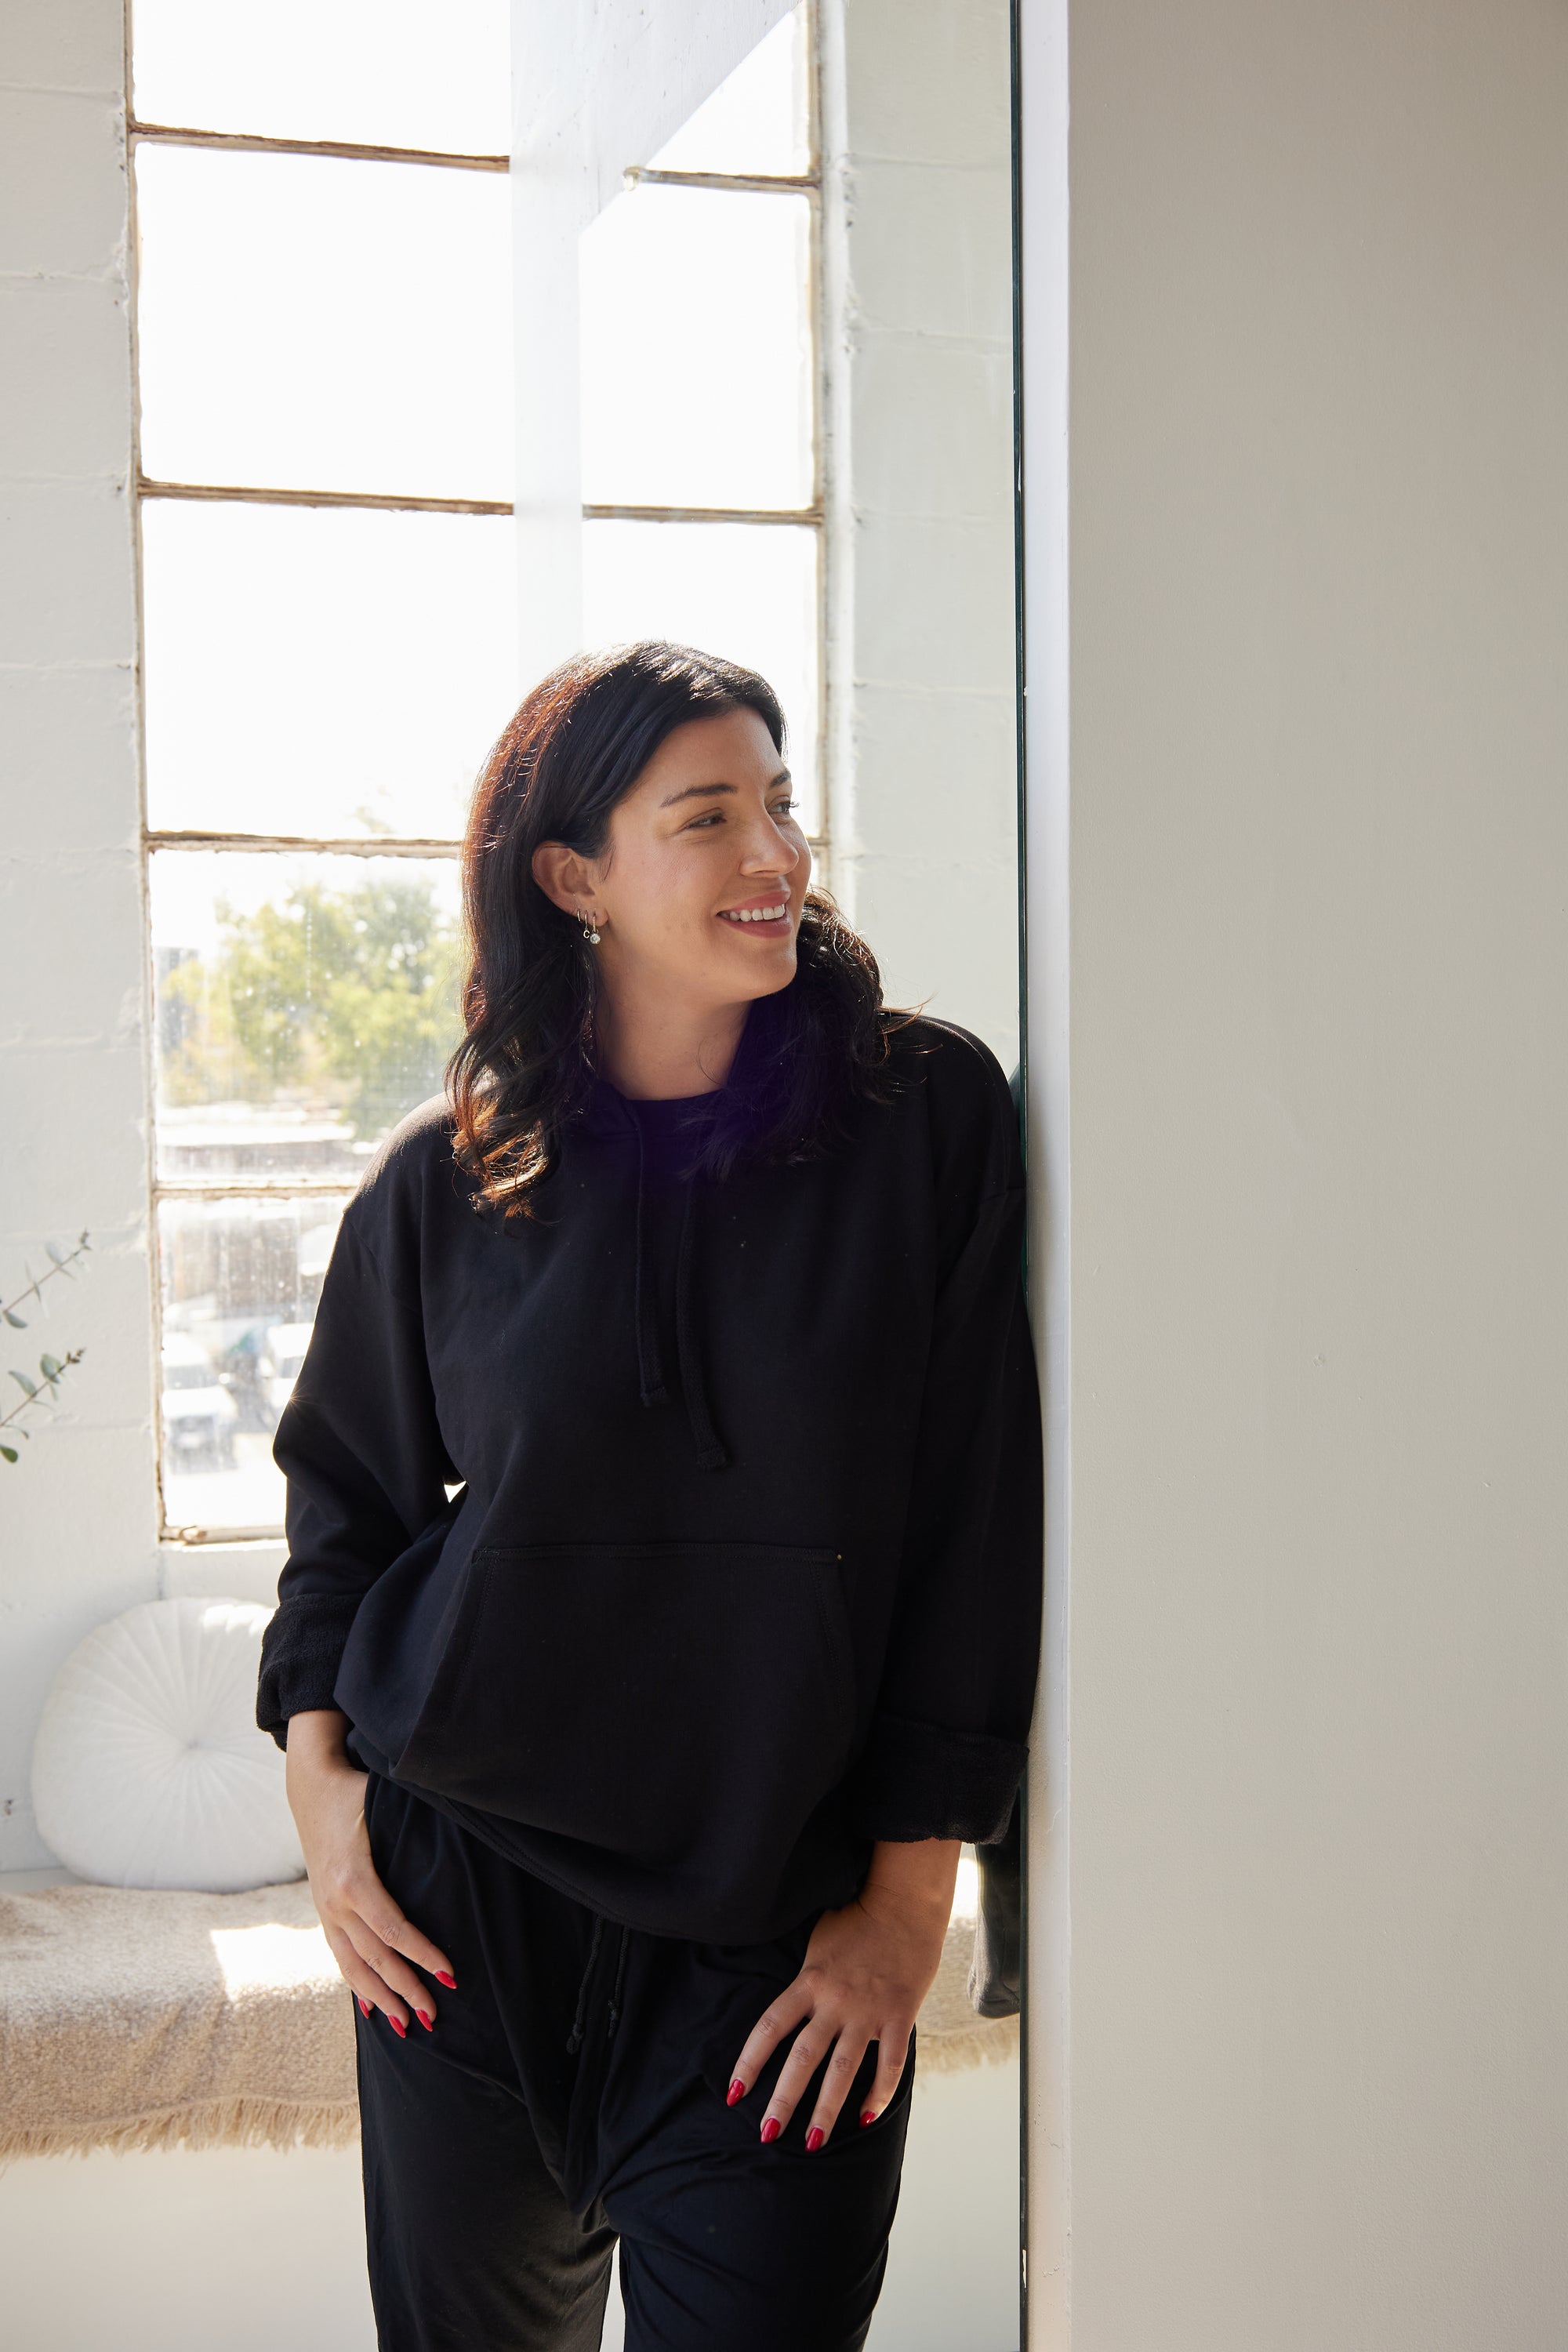 The Black Hoodie by Cassandra Elizabeth is an ethically made, minimalist wardrobe essential, and is the epitome of quiet luxury.